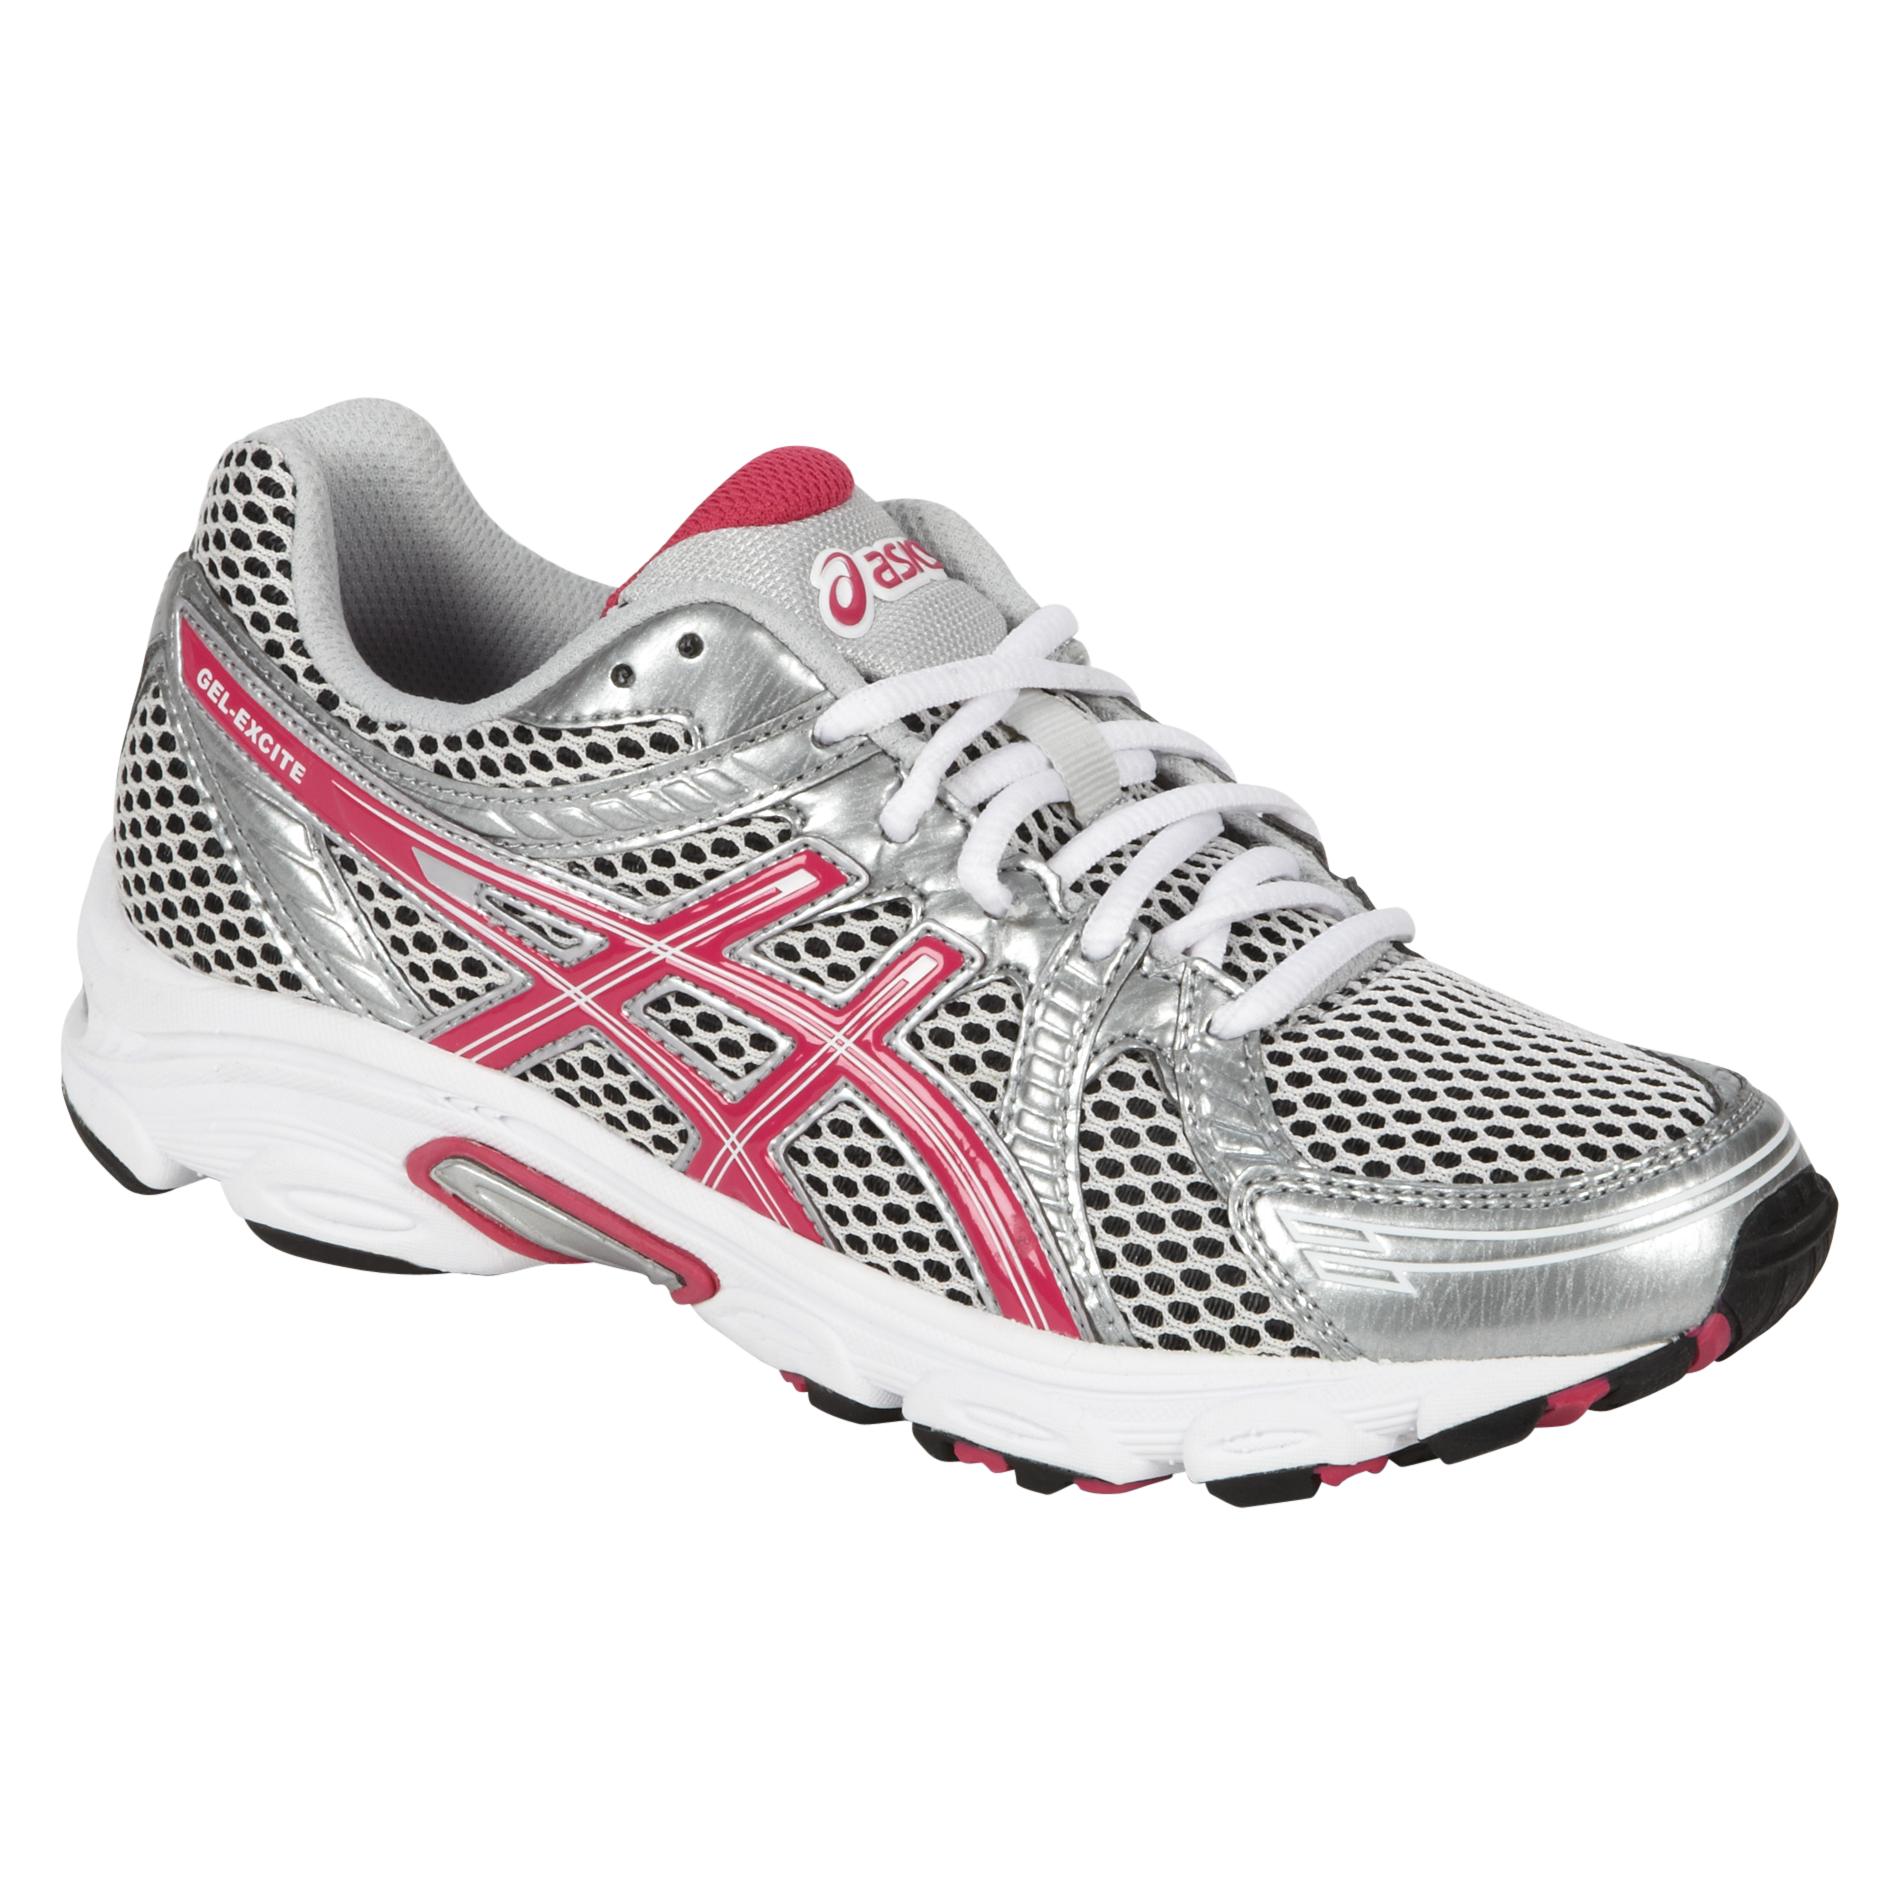 ASICS Women's GEL-Excite Running Athletic Shoe - Silver/Pink